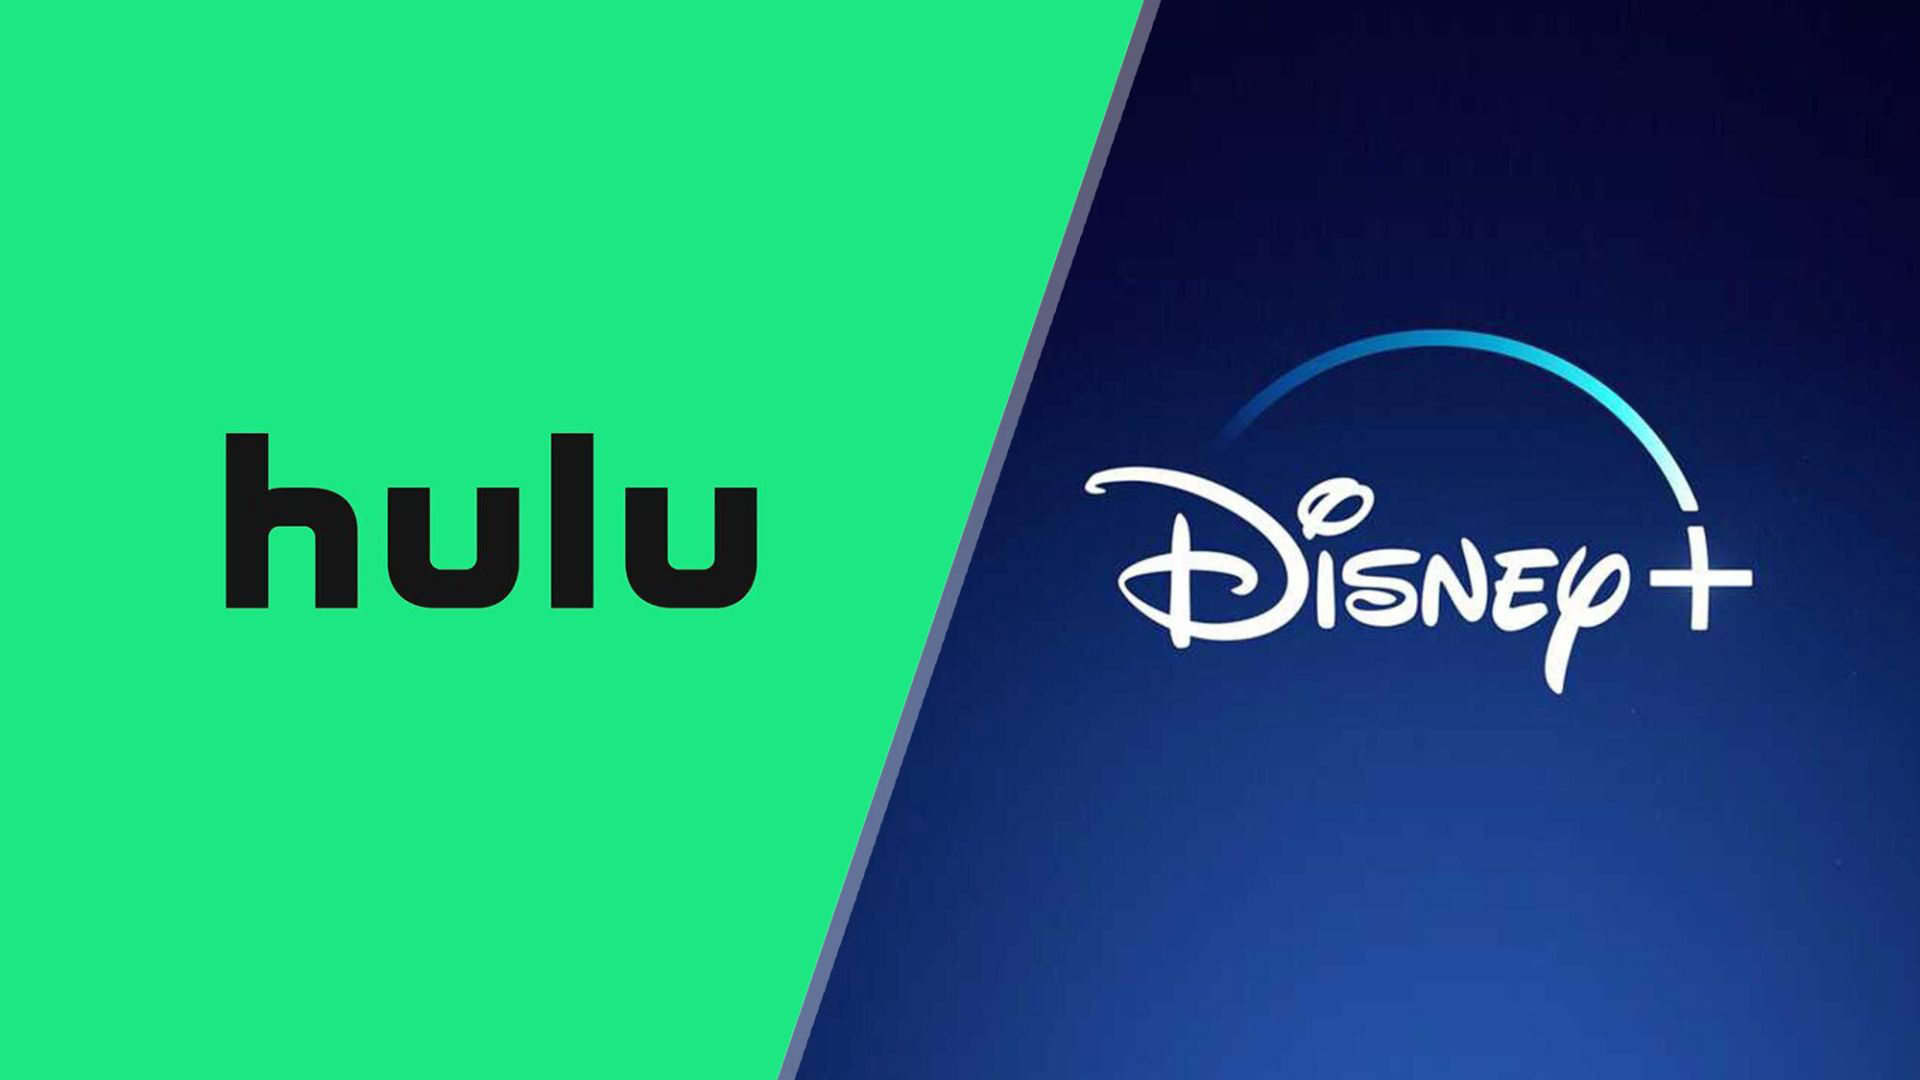 Wow! Disney Plus and Hulu bundle is just 2.99 a month in epic Black